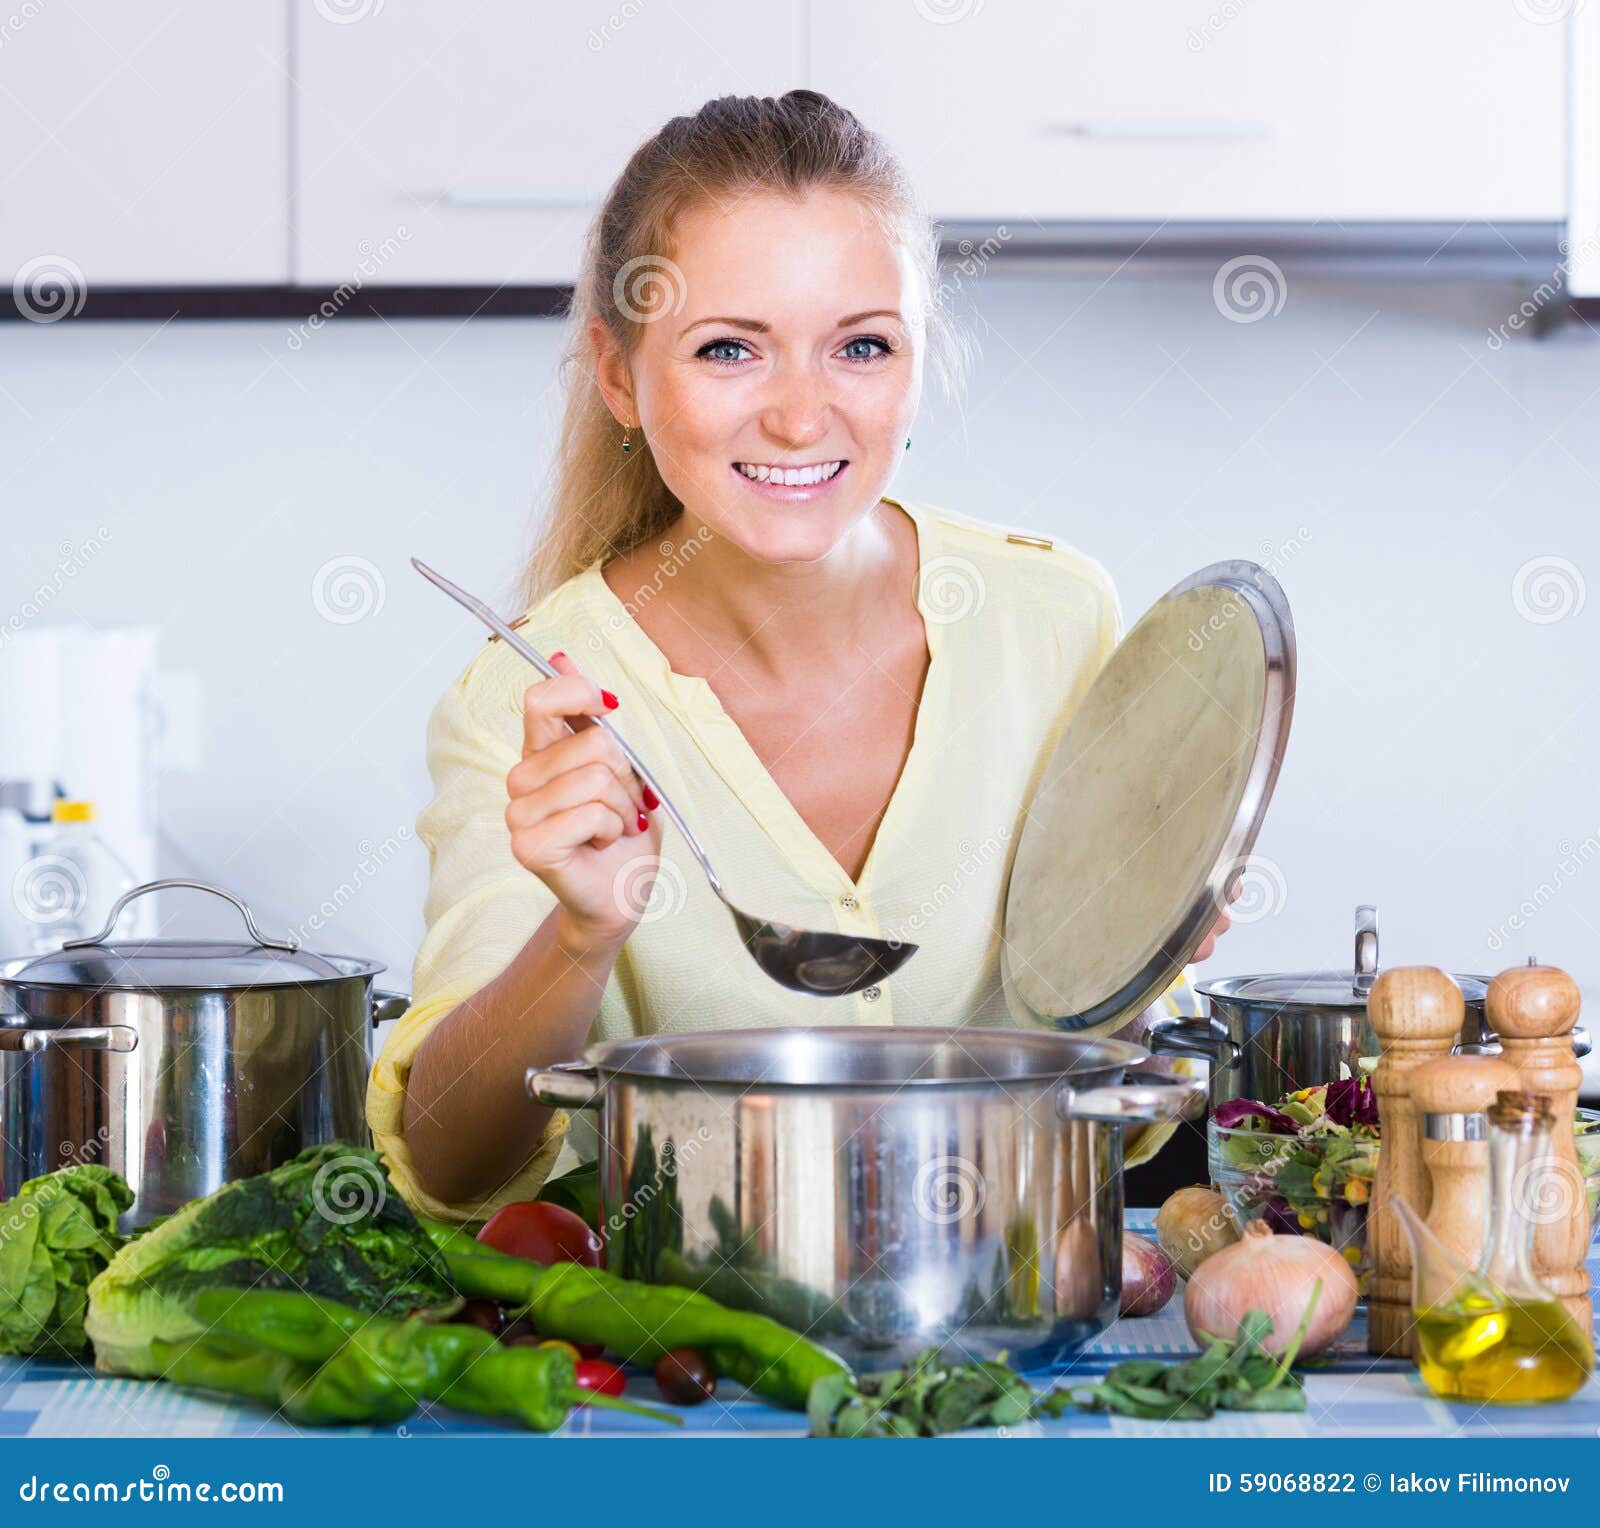 Housewife Cooking Vegetables At Domestic Kit